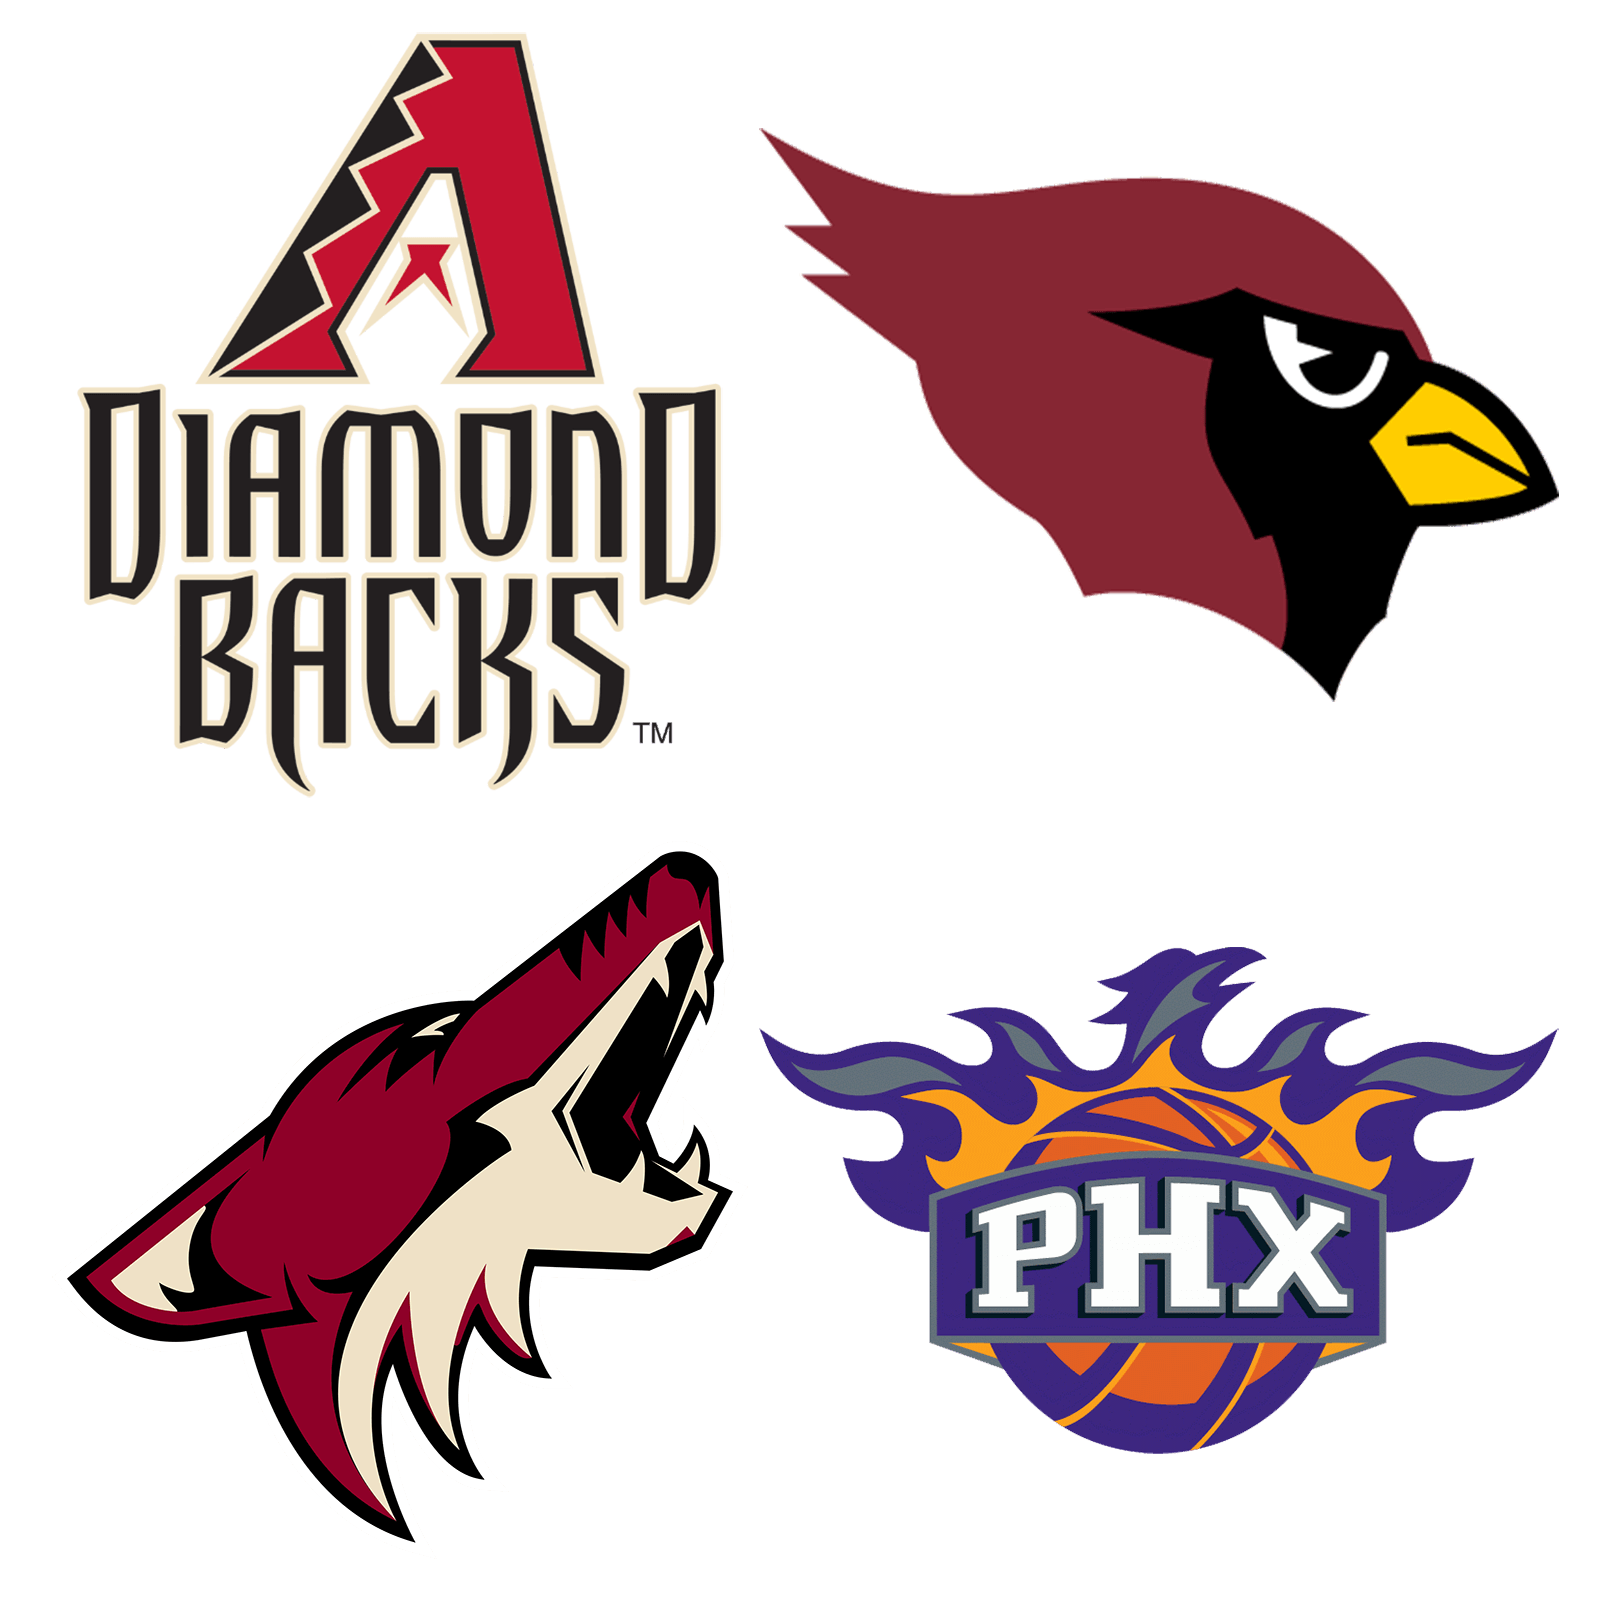 Arizona Football Team Logo - Is Phoenix the Most Dysfunctional Sports Town in America? | Diary of ...